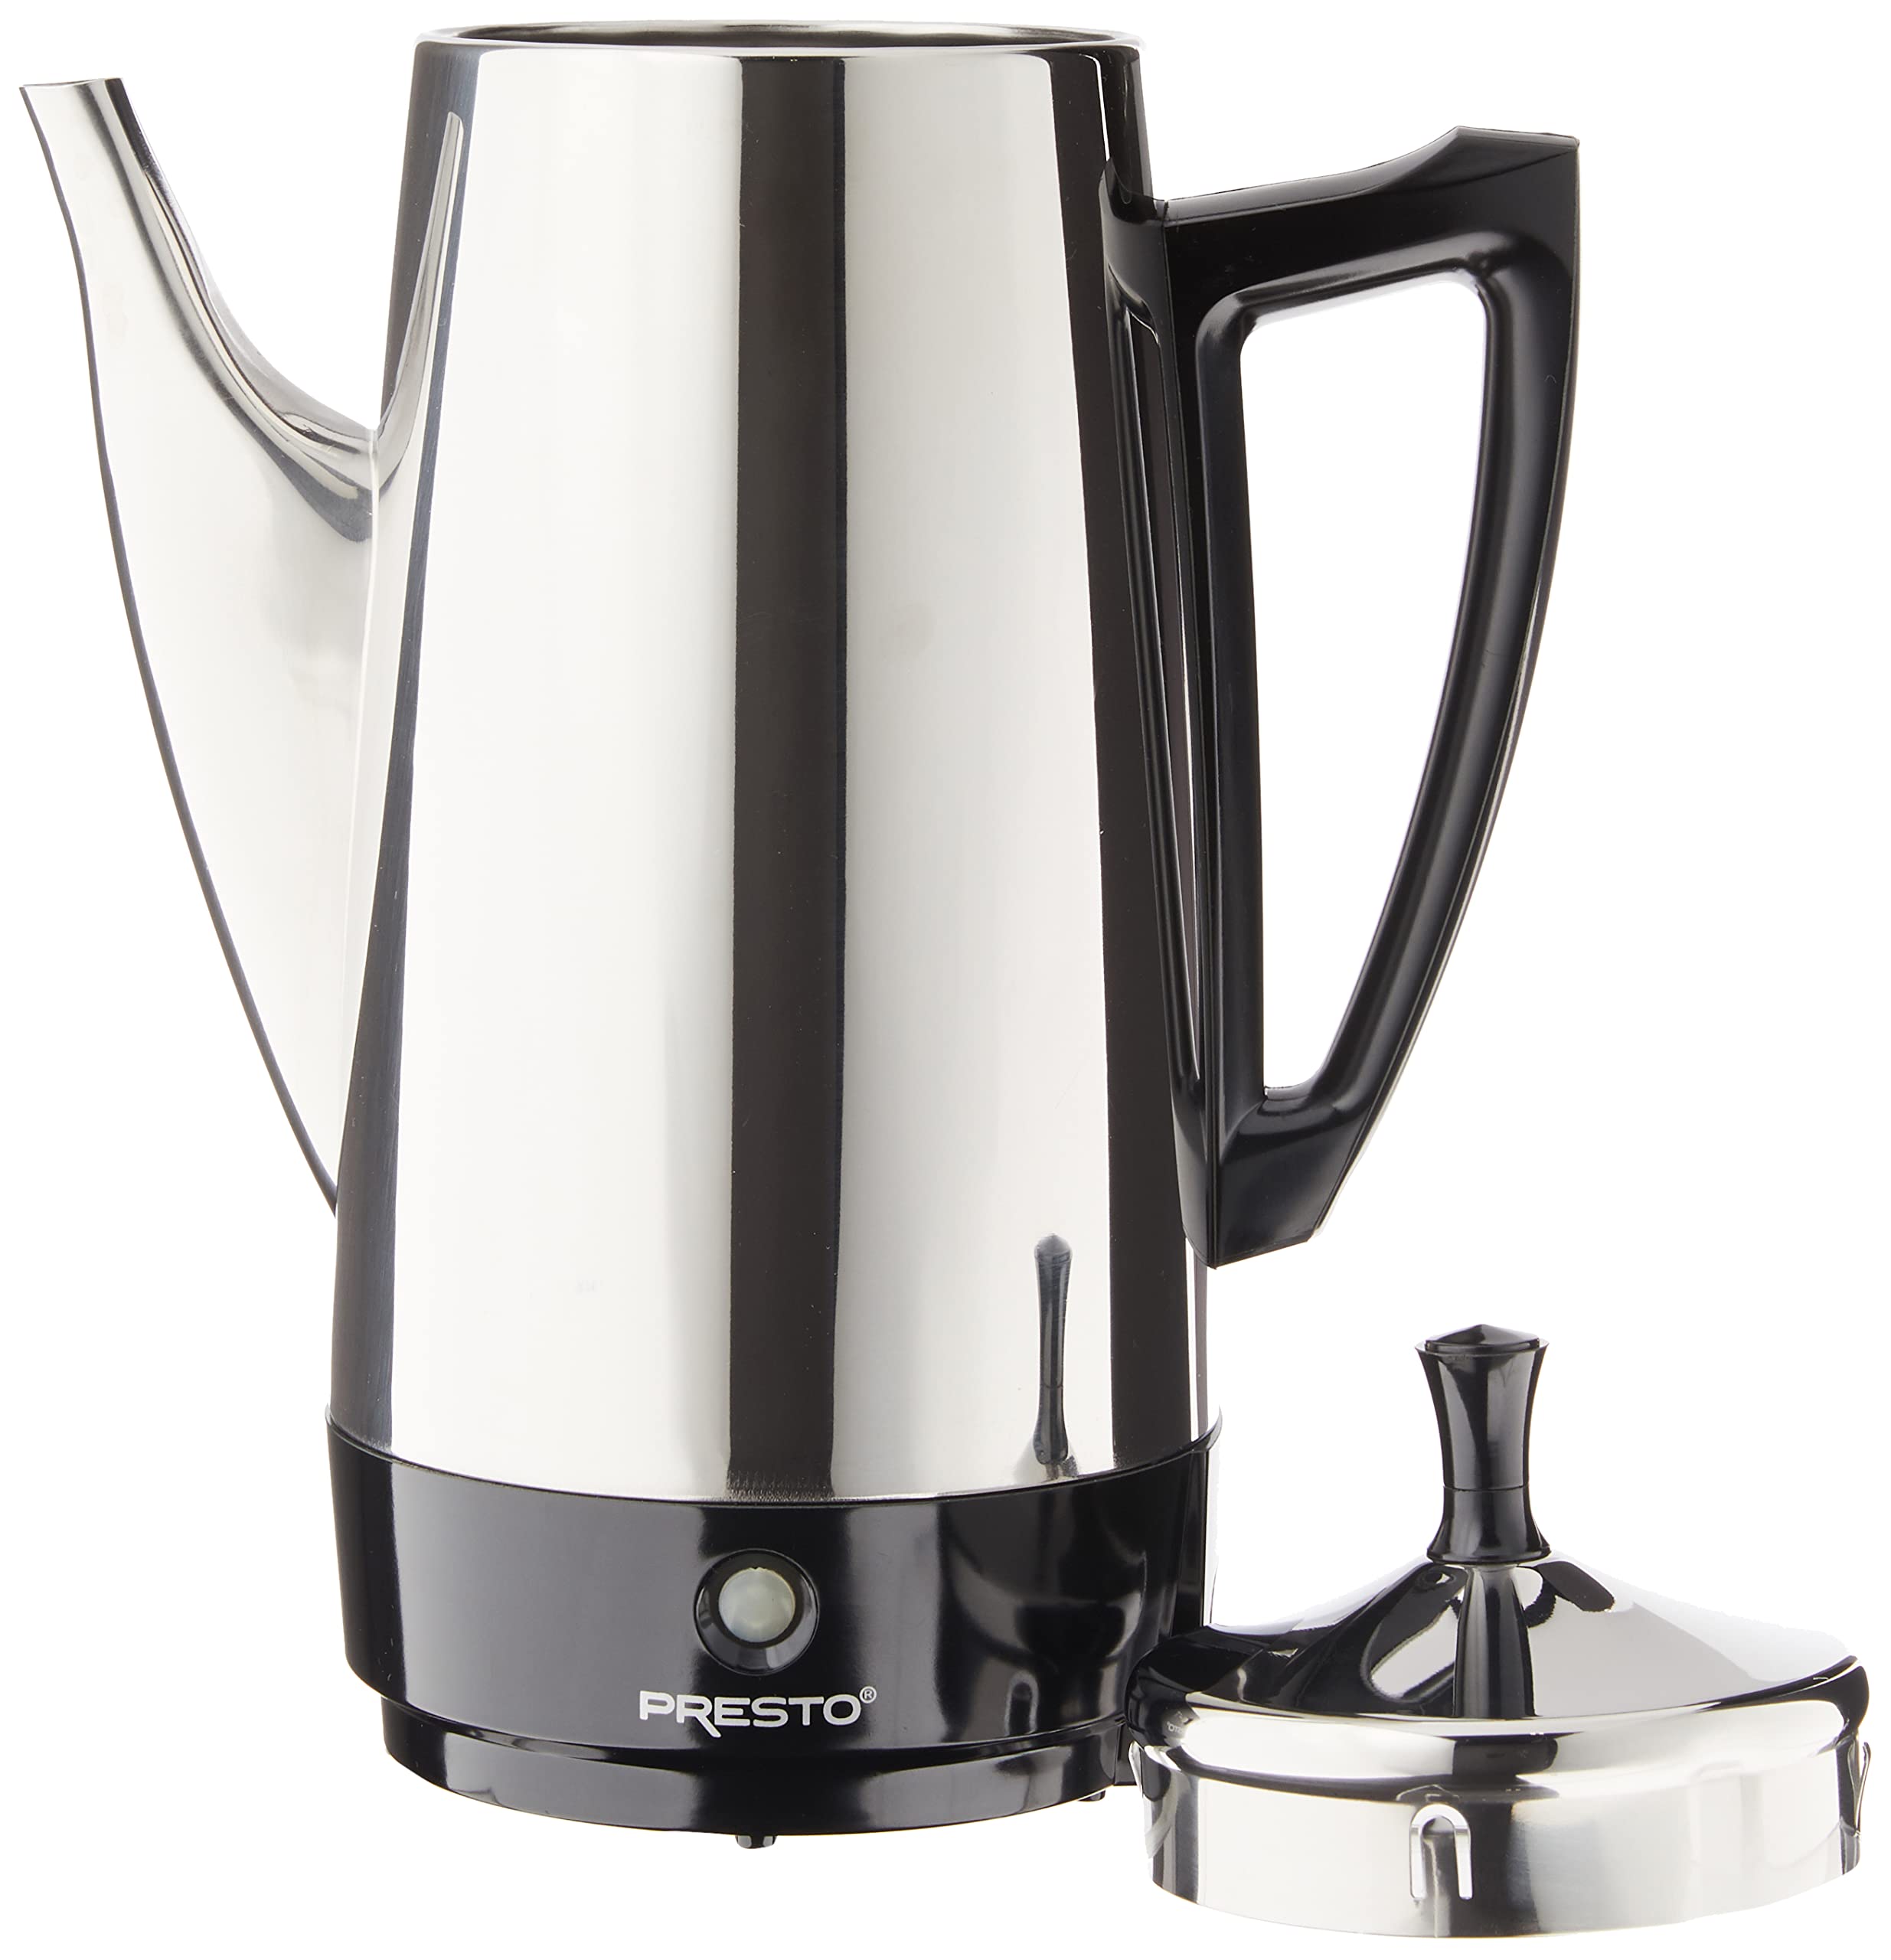 Presto 02811 12-Cup Stainless Steel Coffee Maker, 9.7